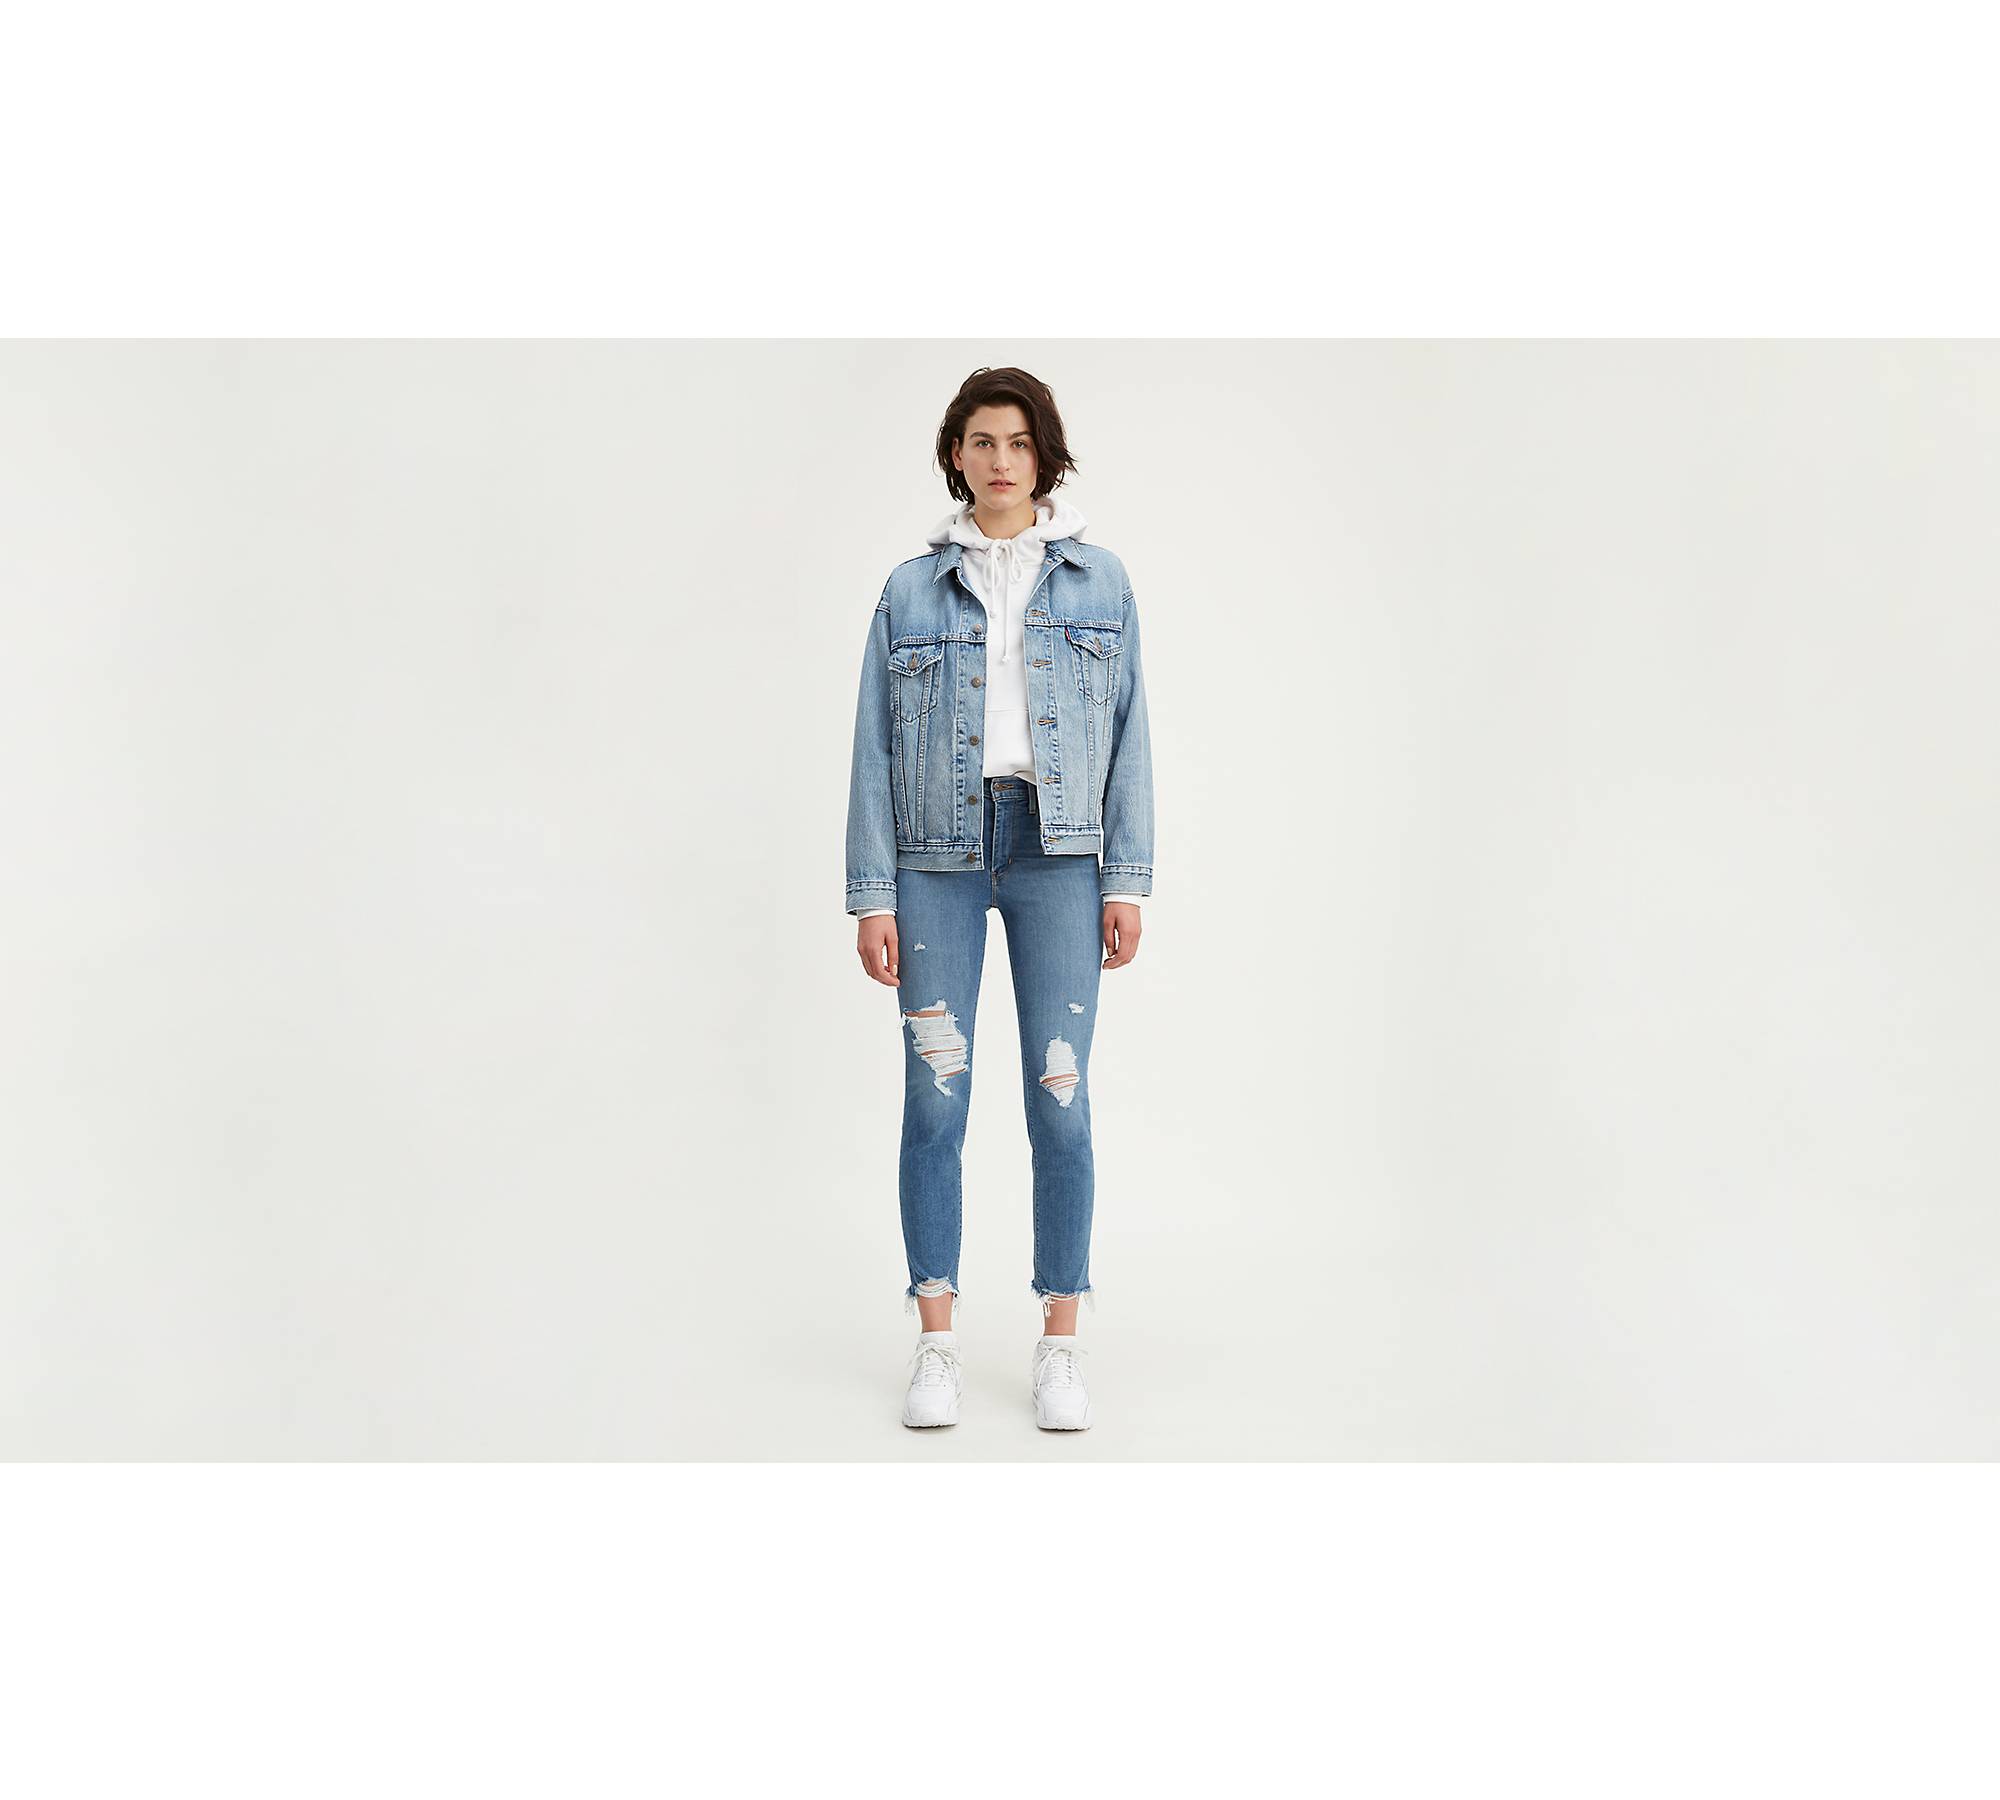 Levi's 724 high rise ripped straight jean in mid wash